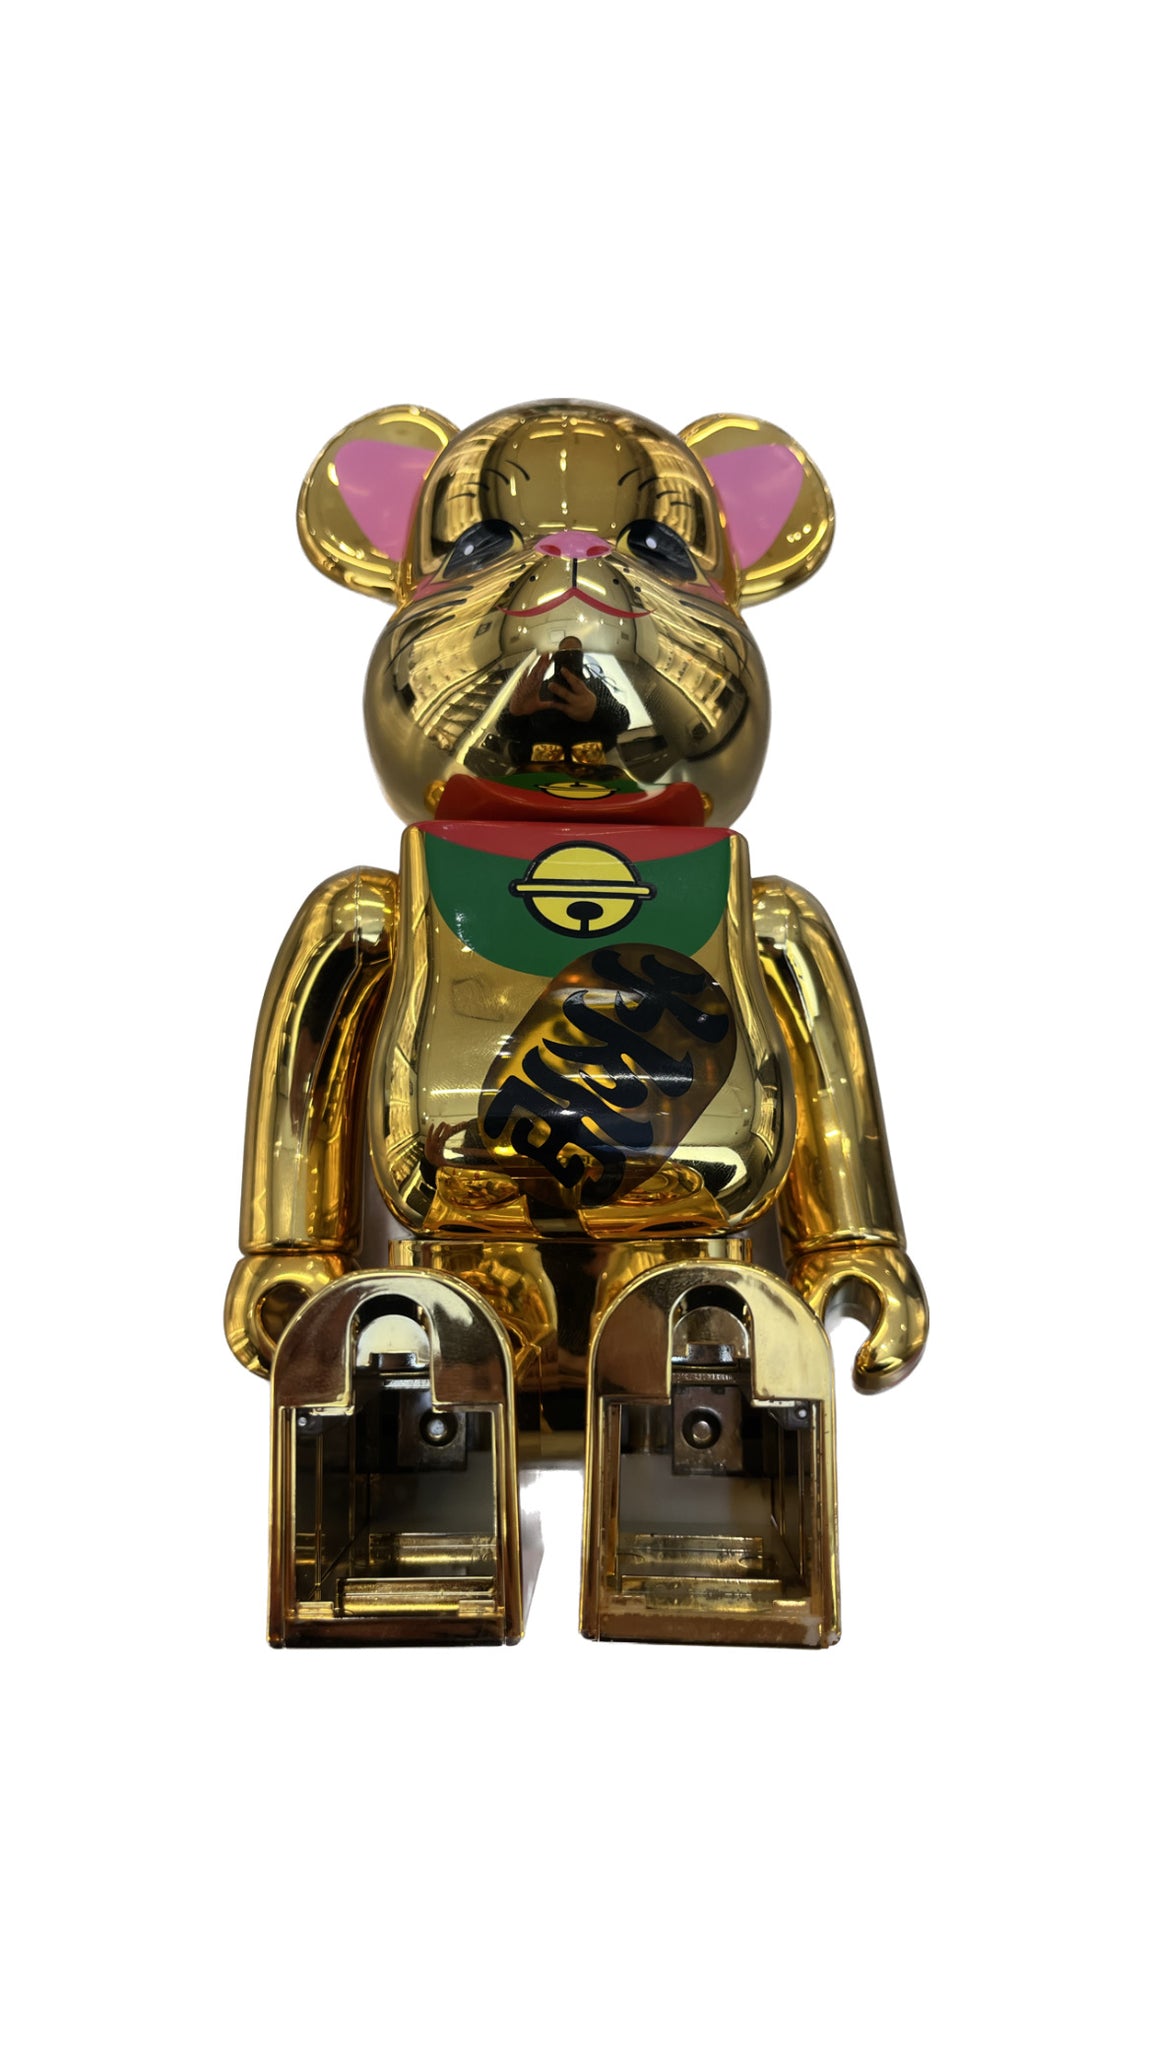 Bearbrick Beckoning Cat Gold 400% (Missing Battery Cover)